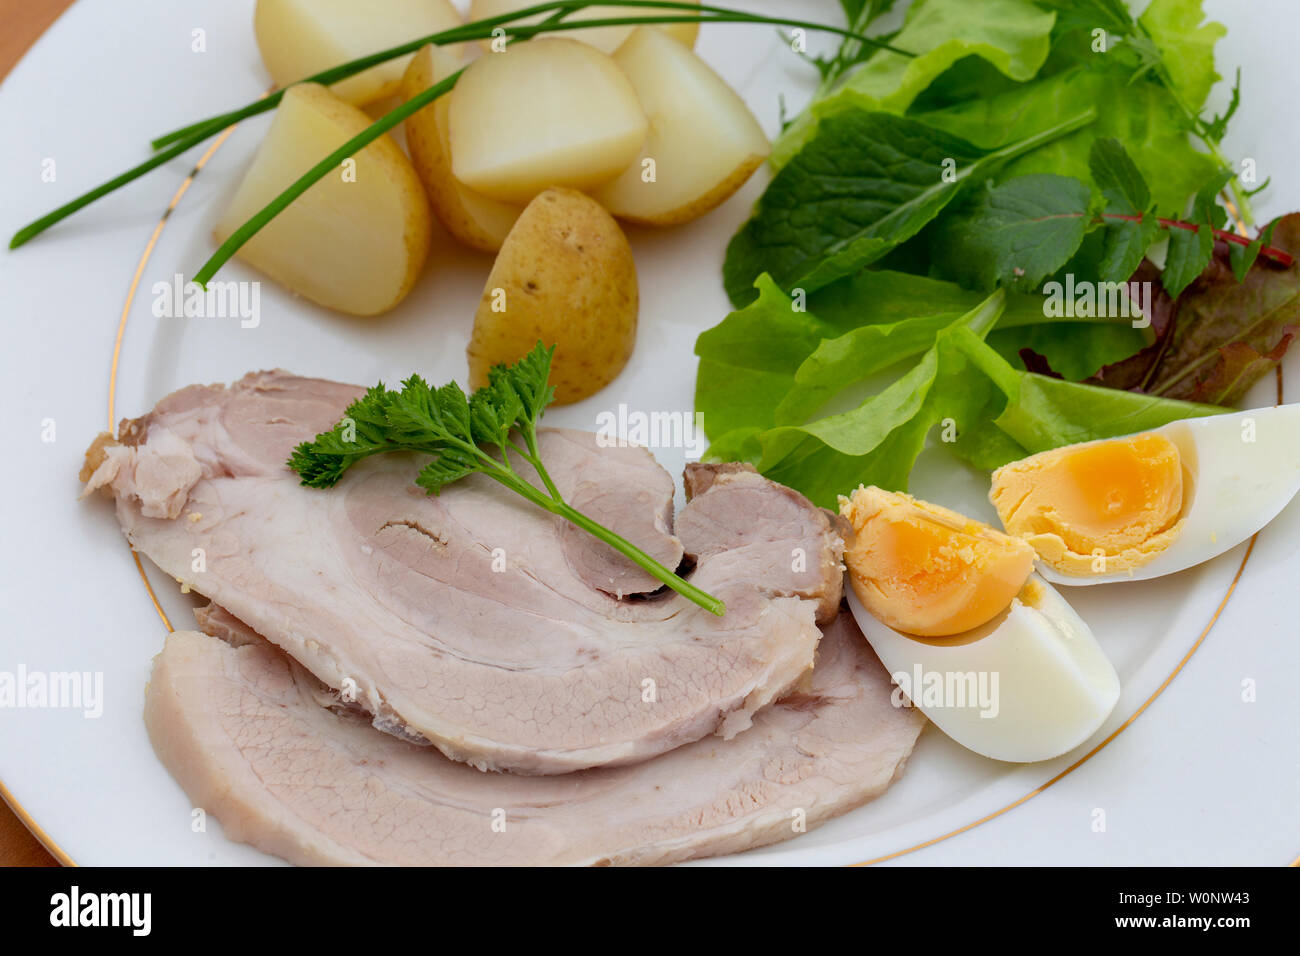 High angle view of cold roast pork slice dinner with salad leaves, chives, egg and boiled new potatoes Stock Photo